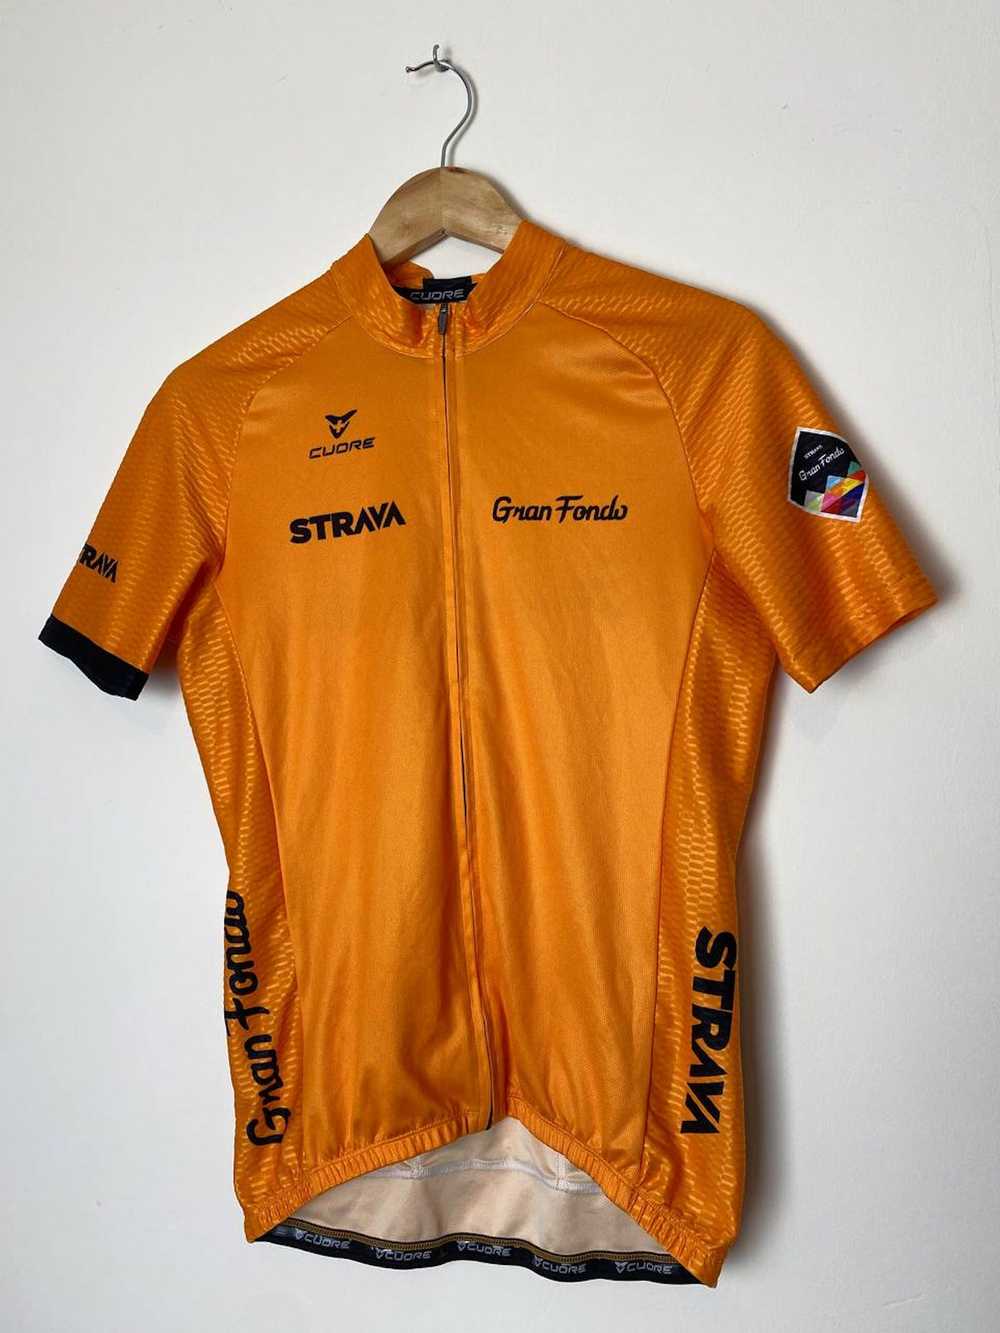 Cycle × Jersey × Sportswear Cuore Strava Limited … - image 4